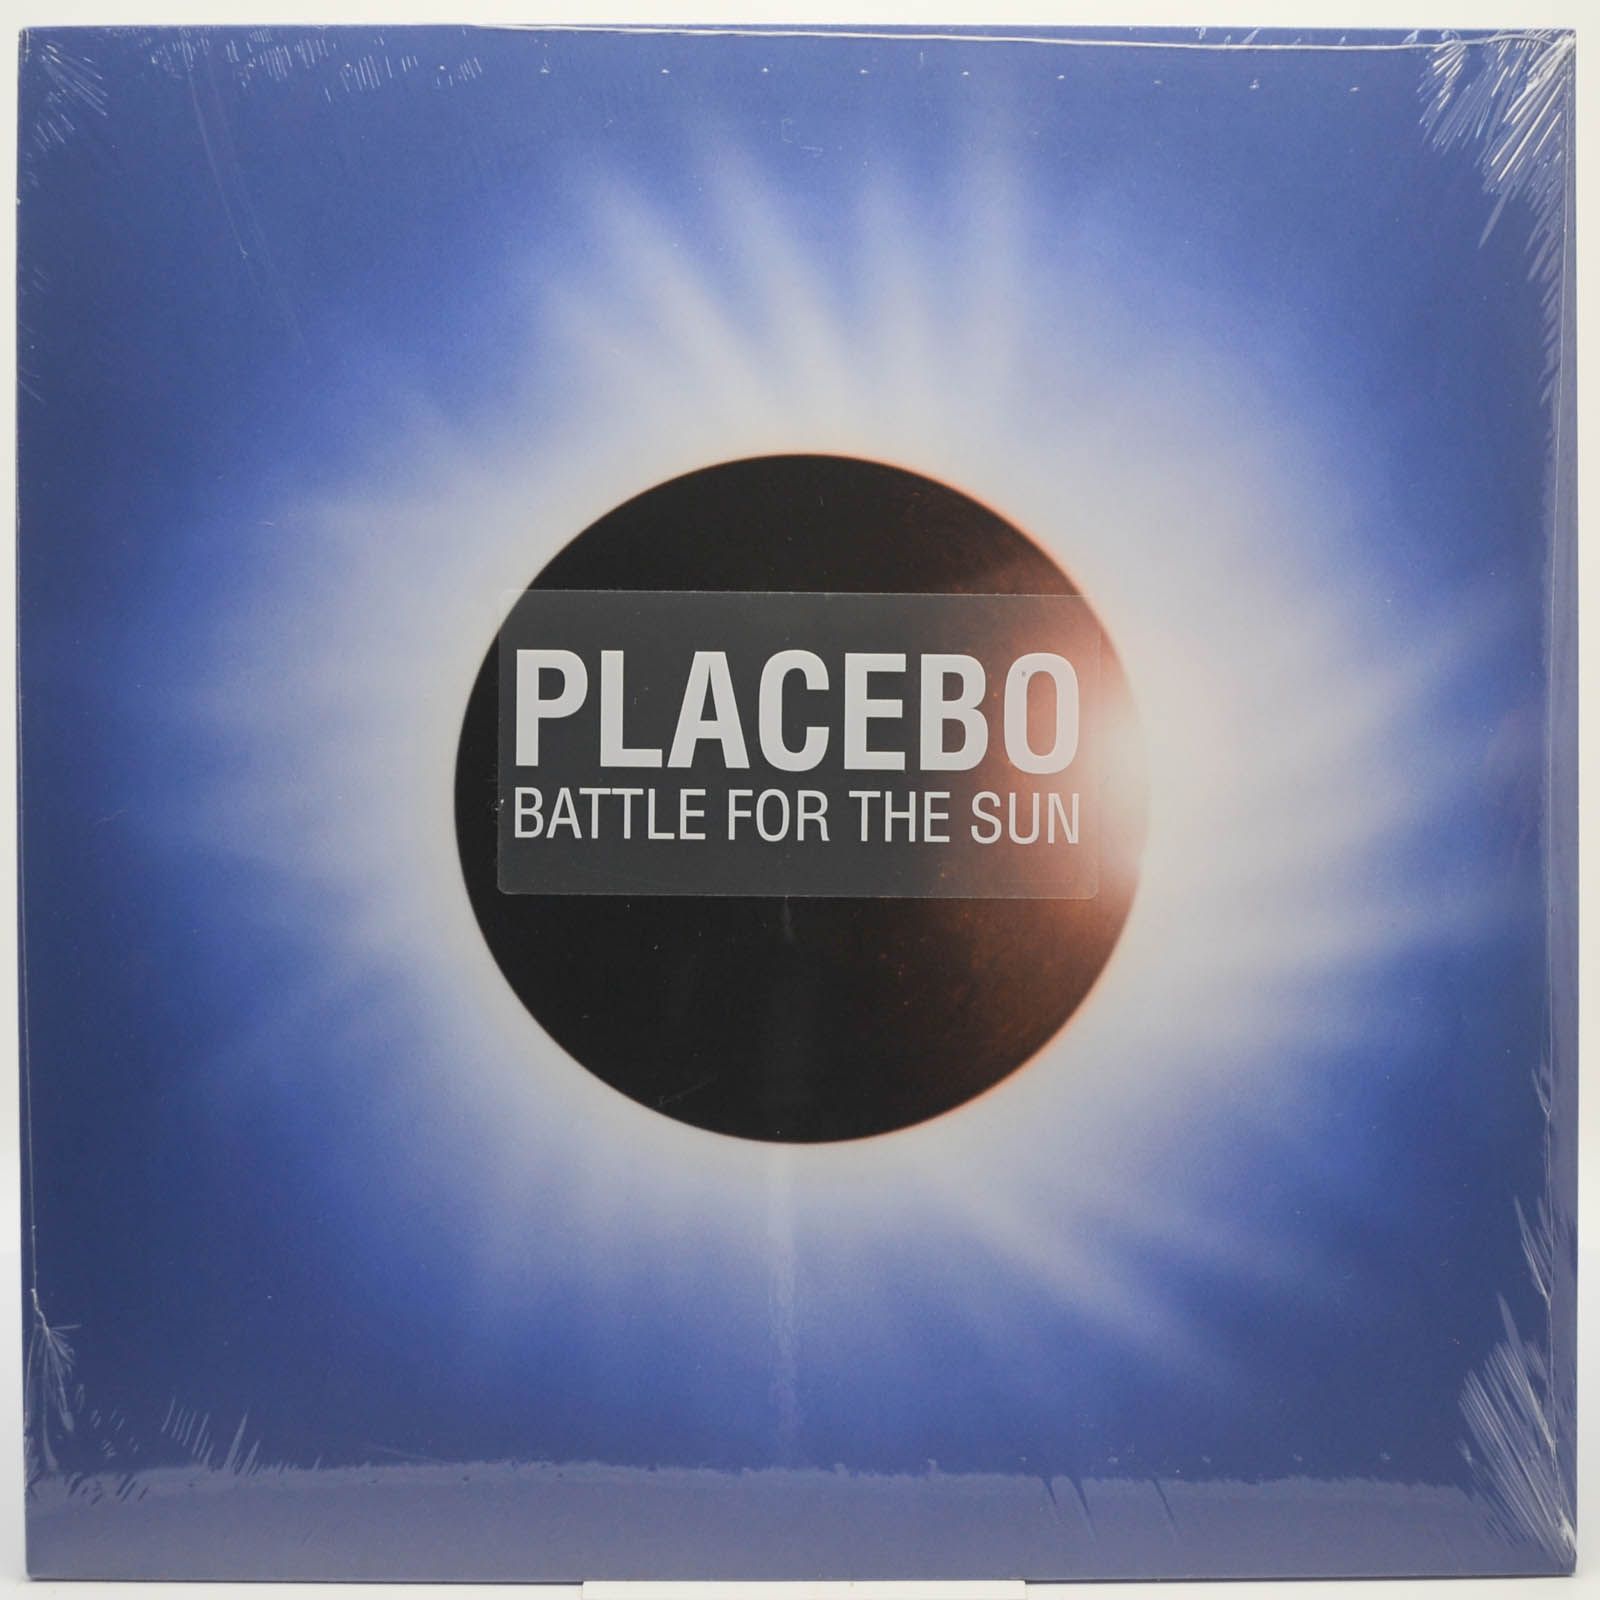 Placebo — Battle For The Sun, 2009